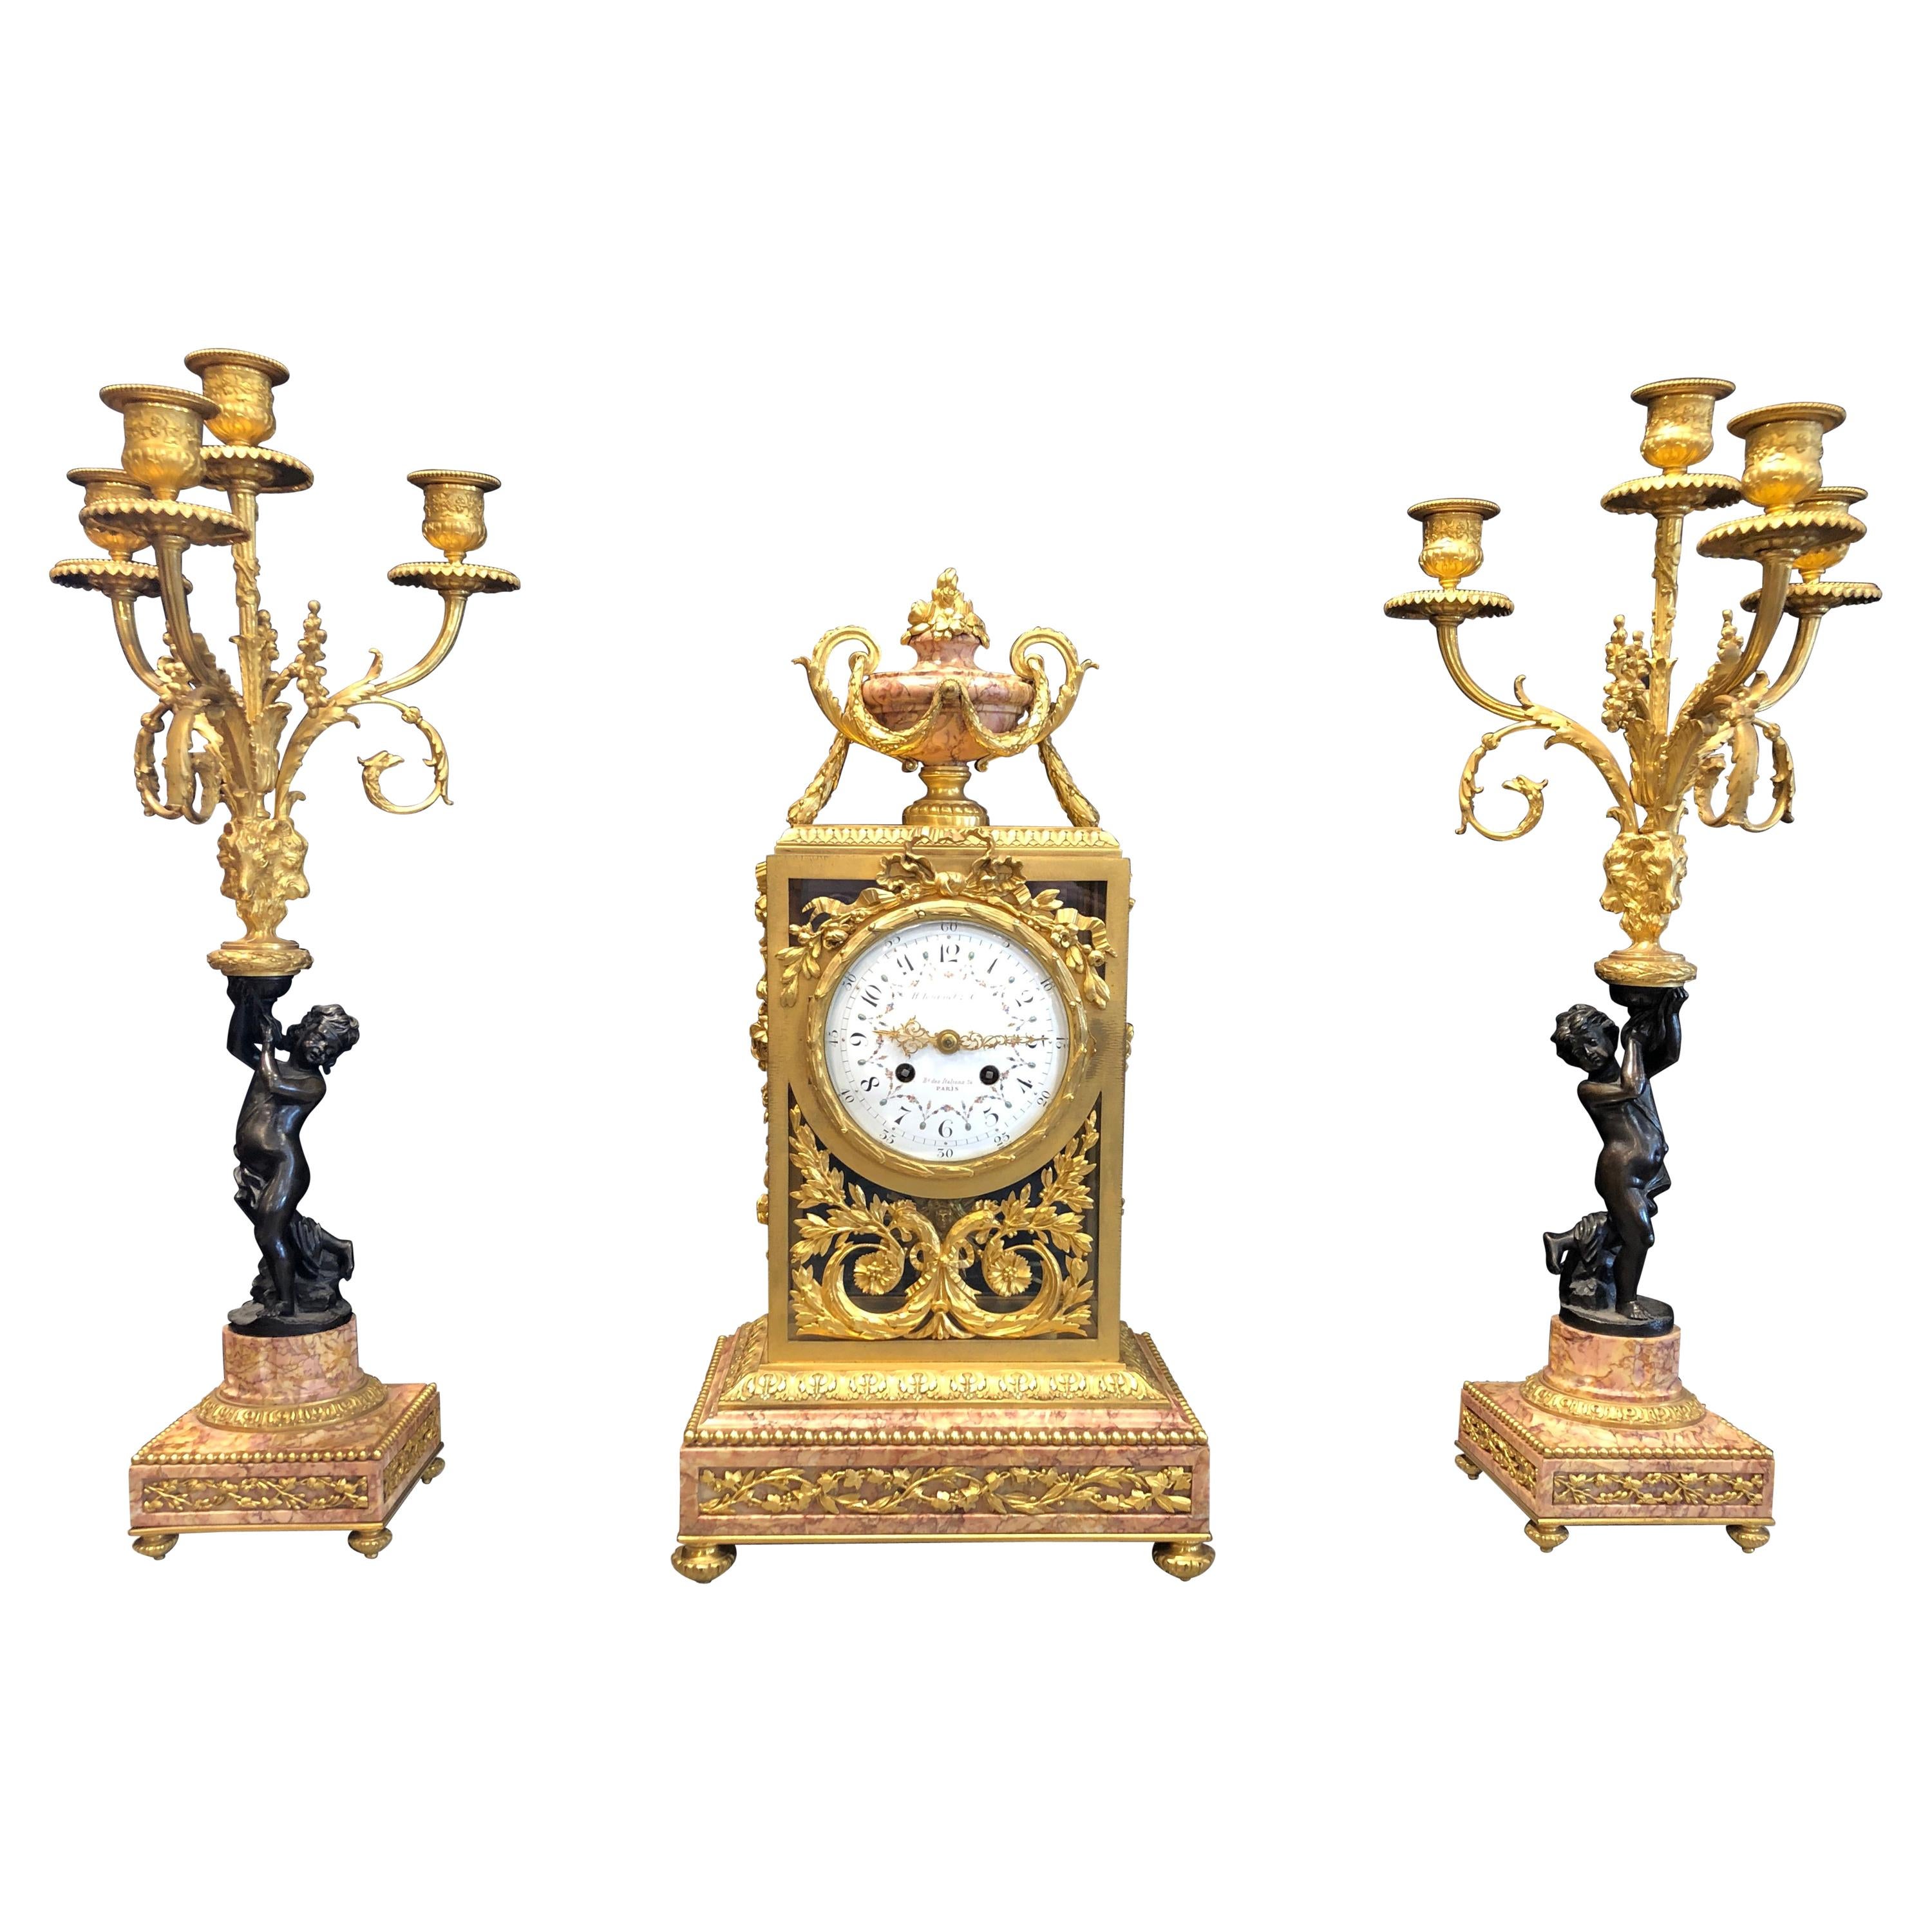 19th Century Napoleon III Marble and Bronze Mantel Clock by H. Journet & Cie